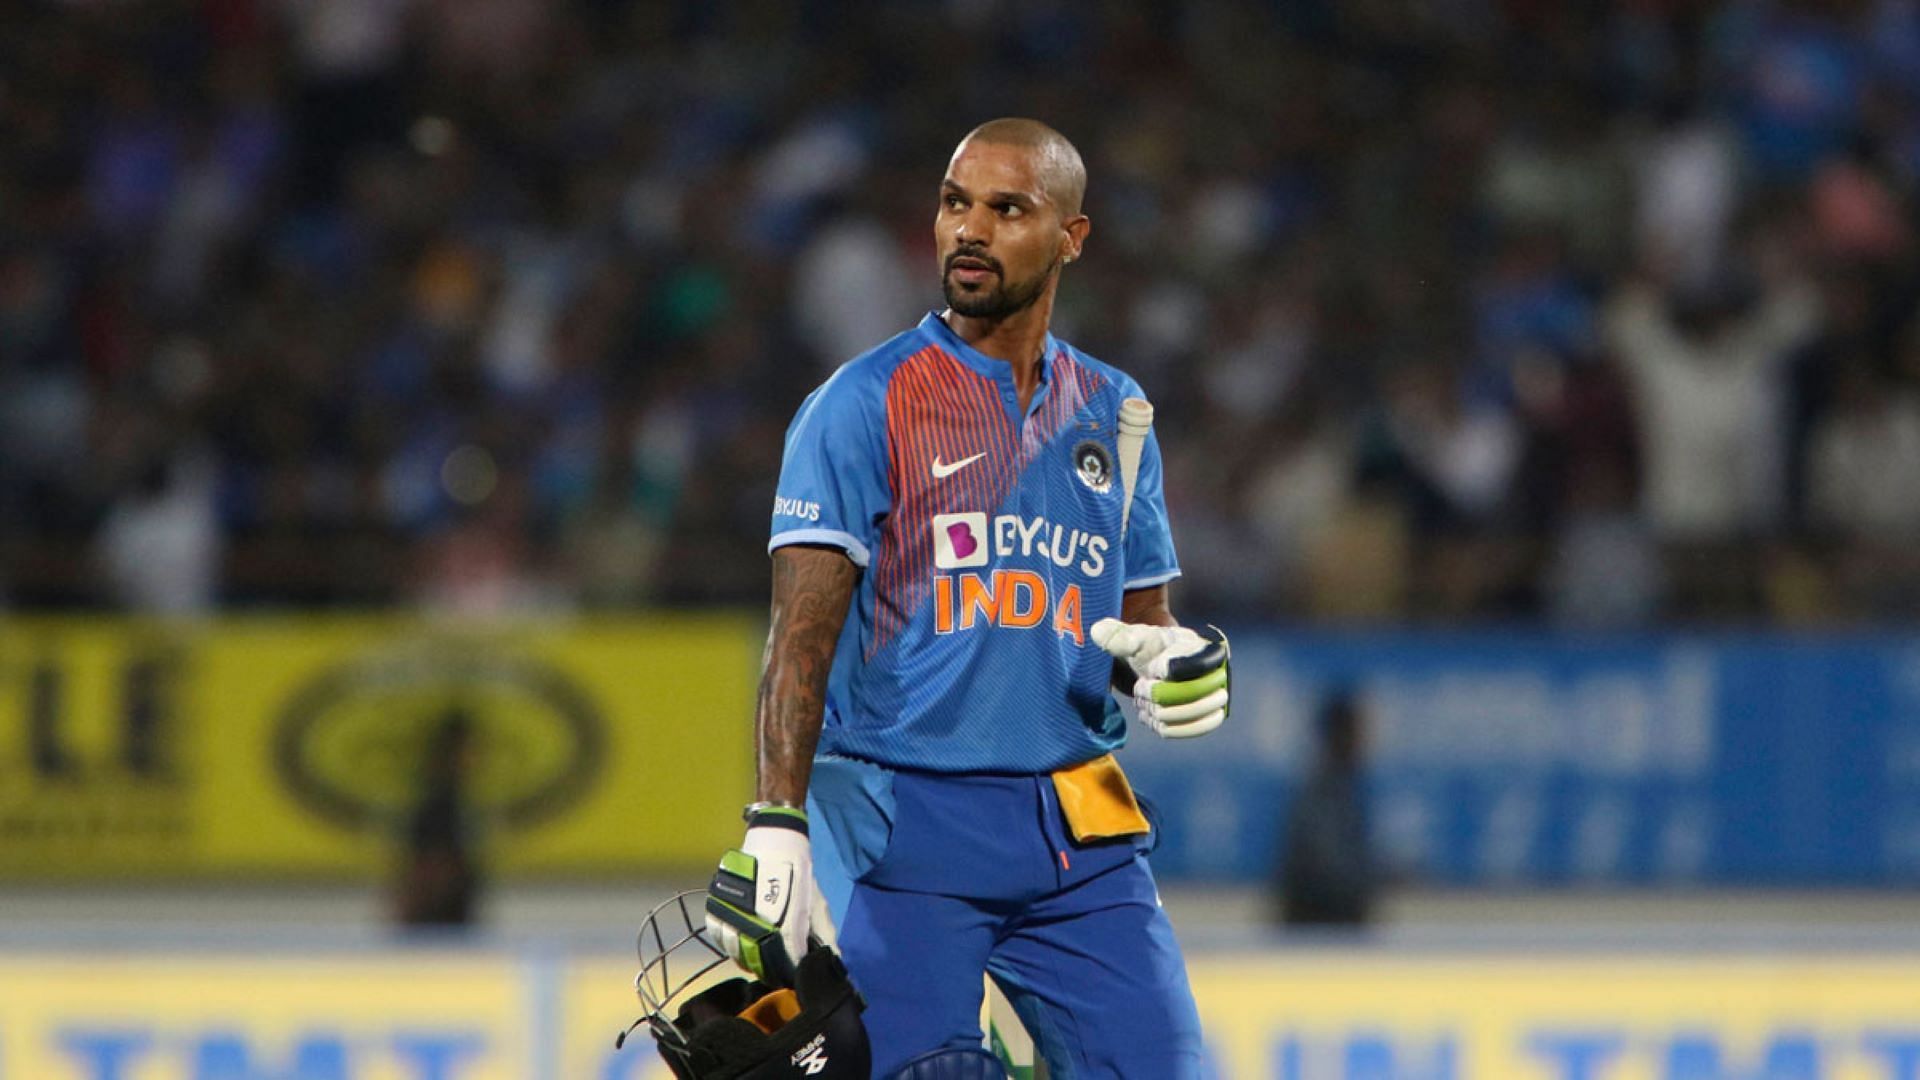 Dhawan was left out of a second string Indian sqaud for the Asian games